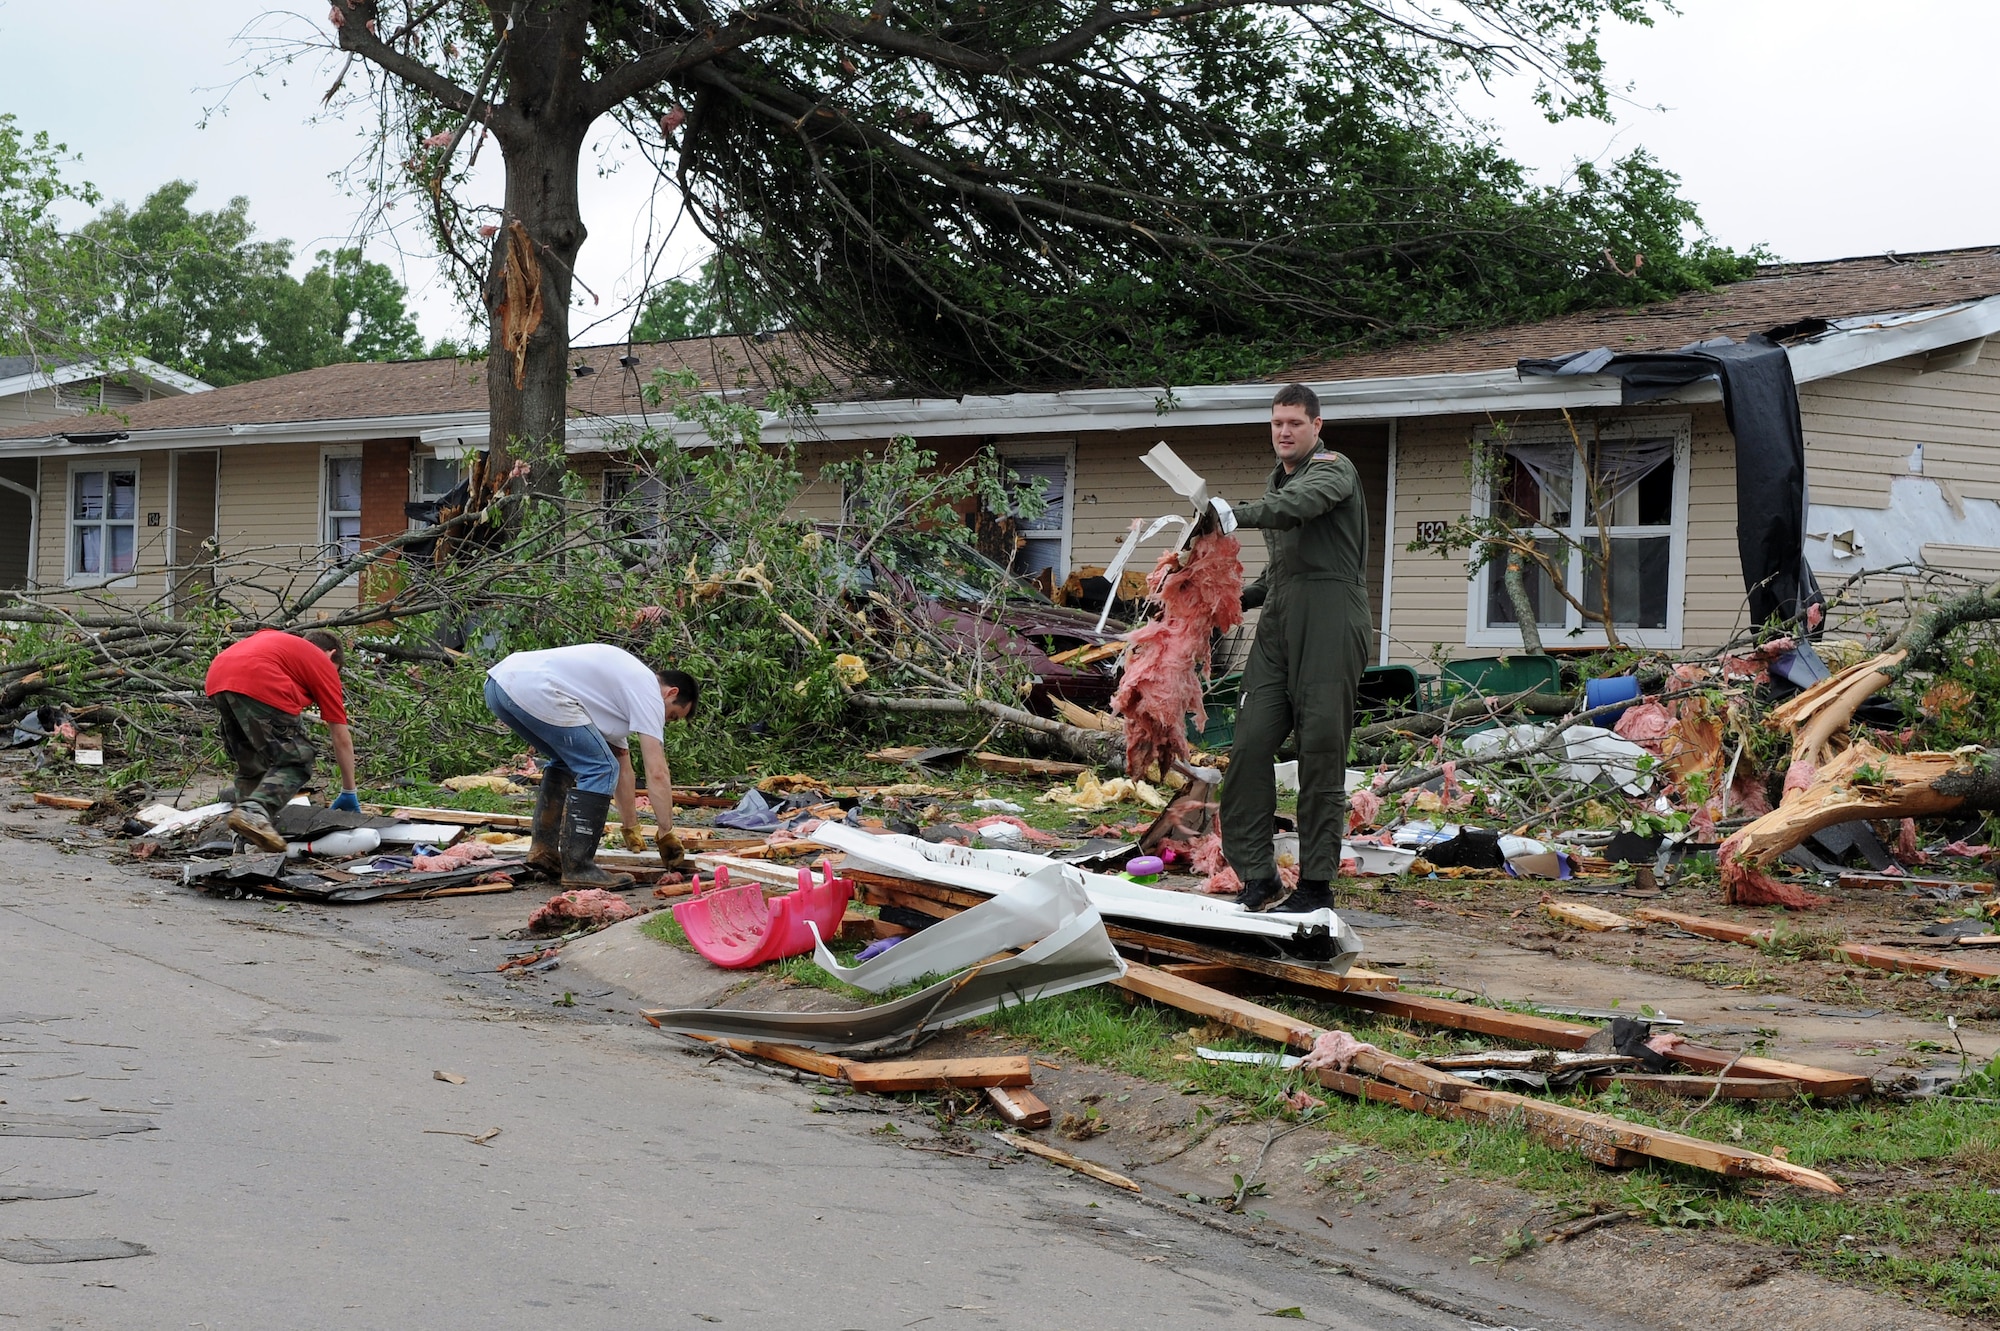 Airmen and family members work to clear debris from base housing after a tornado struck April 25, 2011, at Little Rock Air Force Base, Ark. Several families were relocated from damaged homes to base billeting. (U. S. Air Force photo by Airman 1st Class Ellora Stewart)